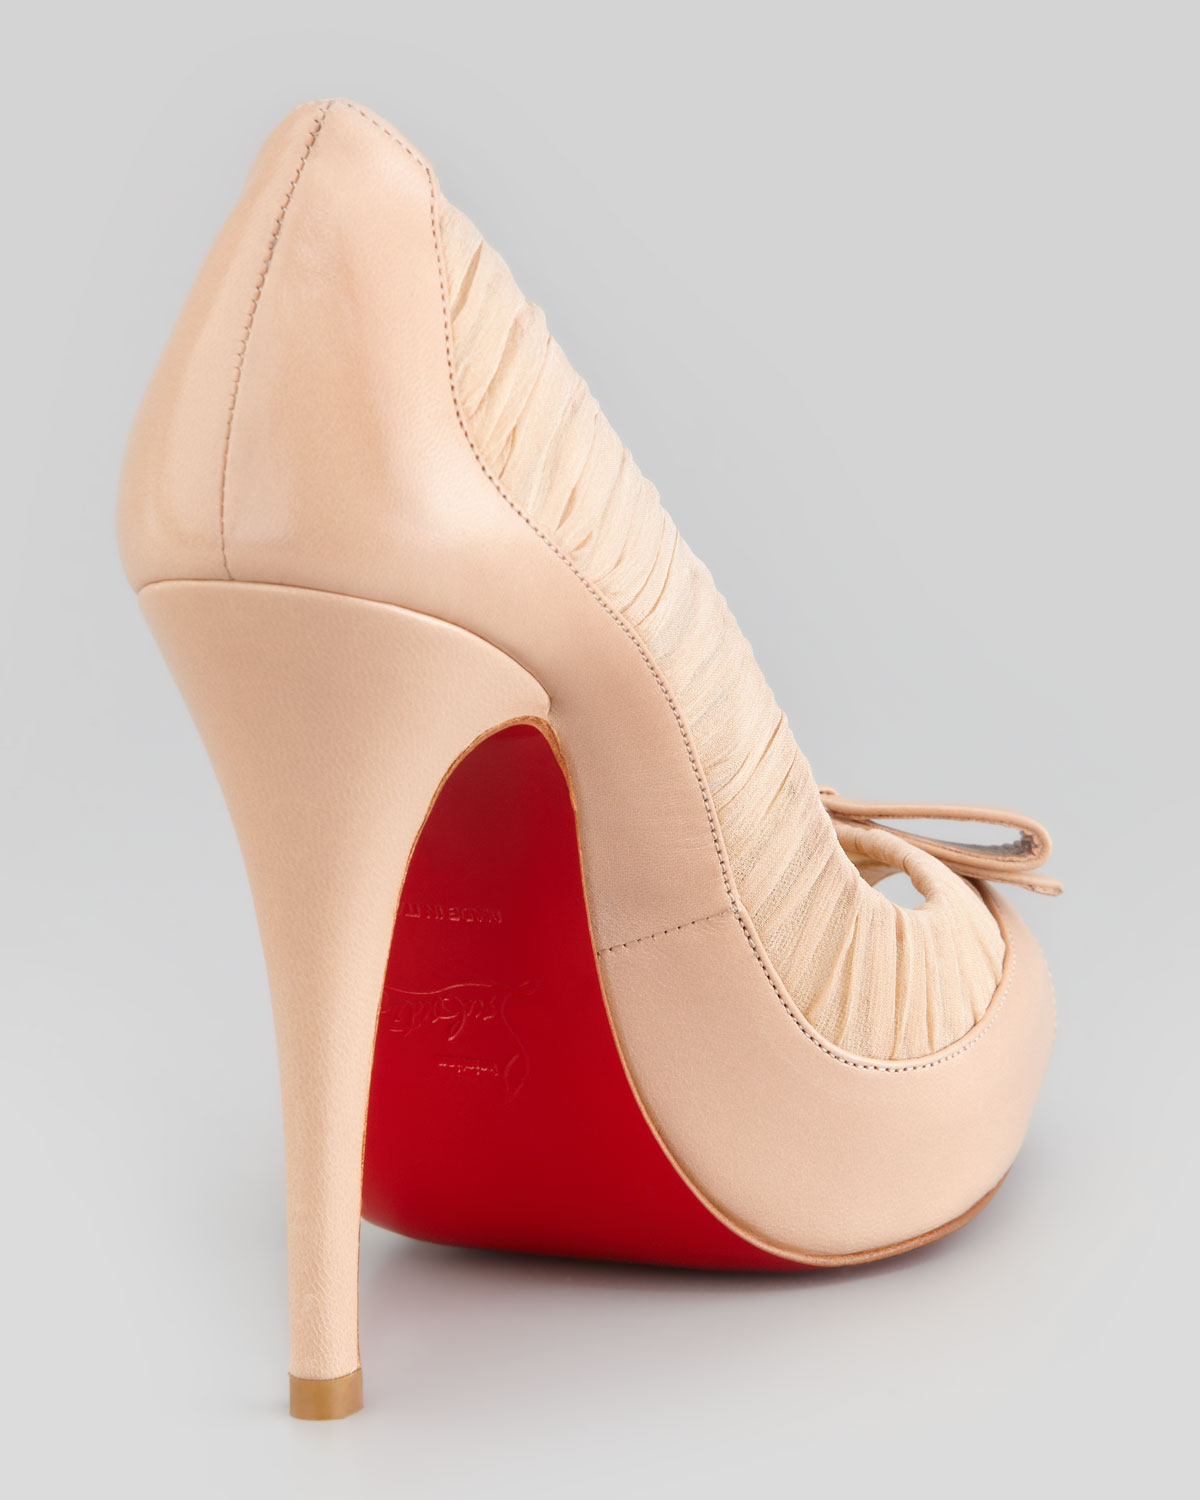 Christian Louboutin launches new color-match heels that 